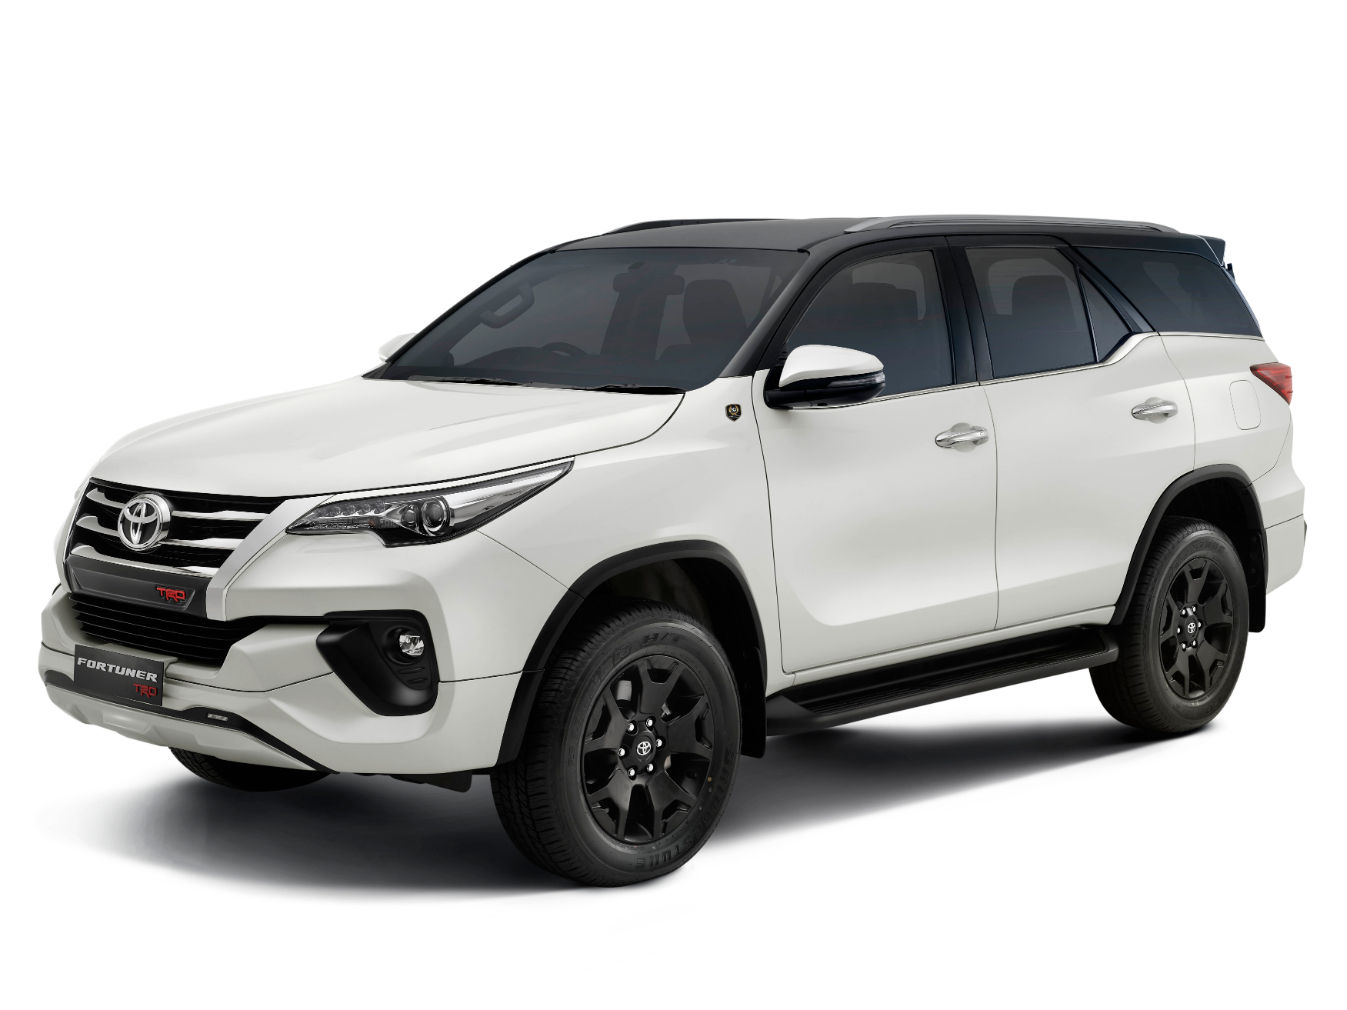 Toyota Fortuner Trd Sportivo Launched At Rs 33 85 Lakh